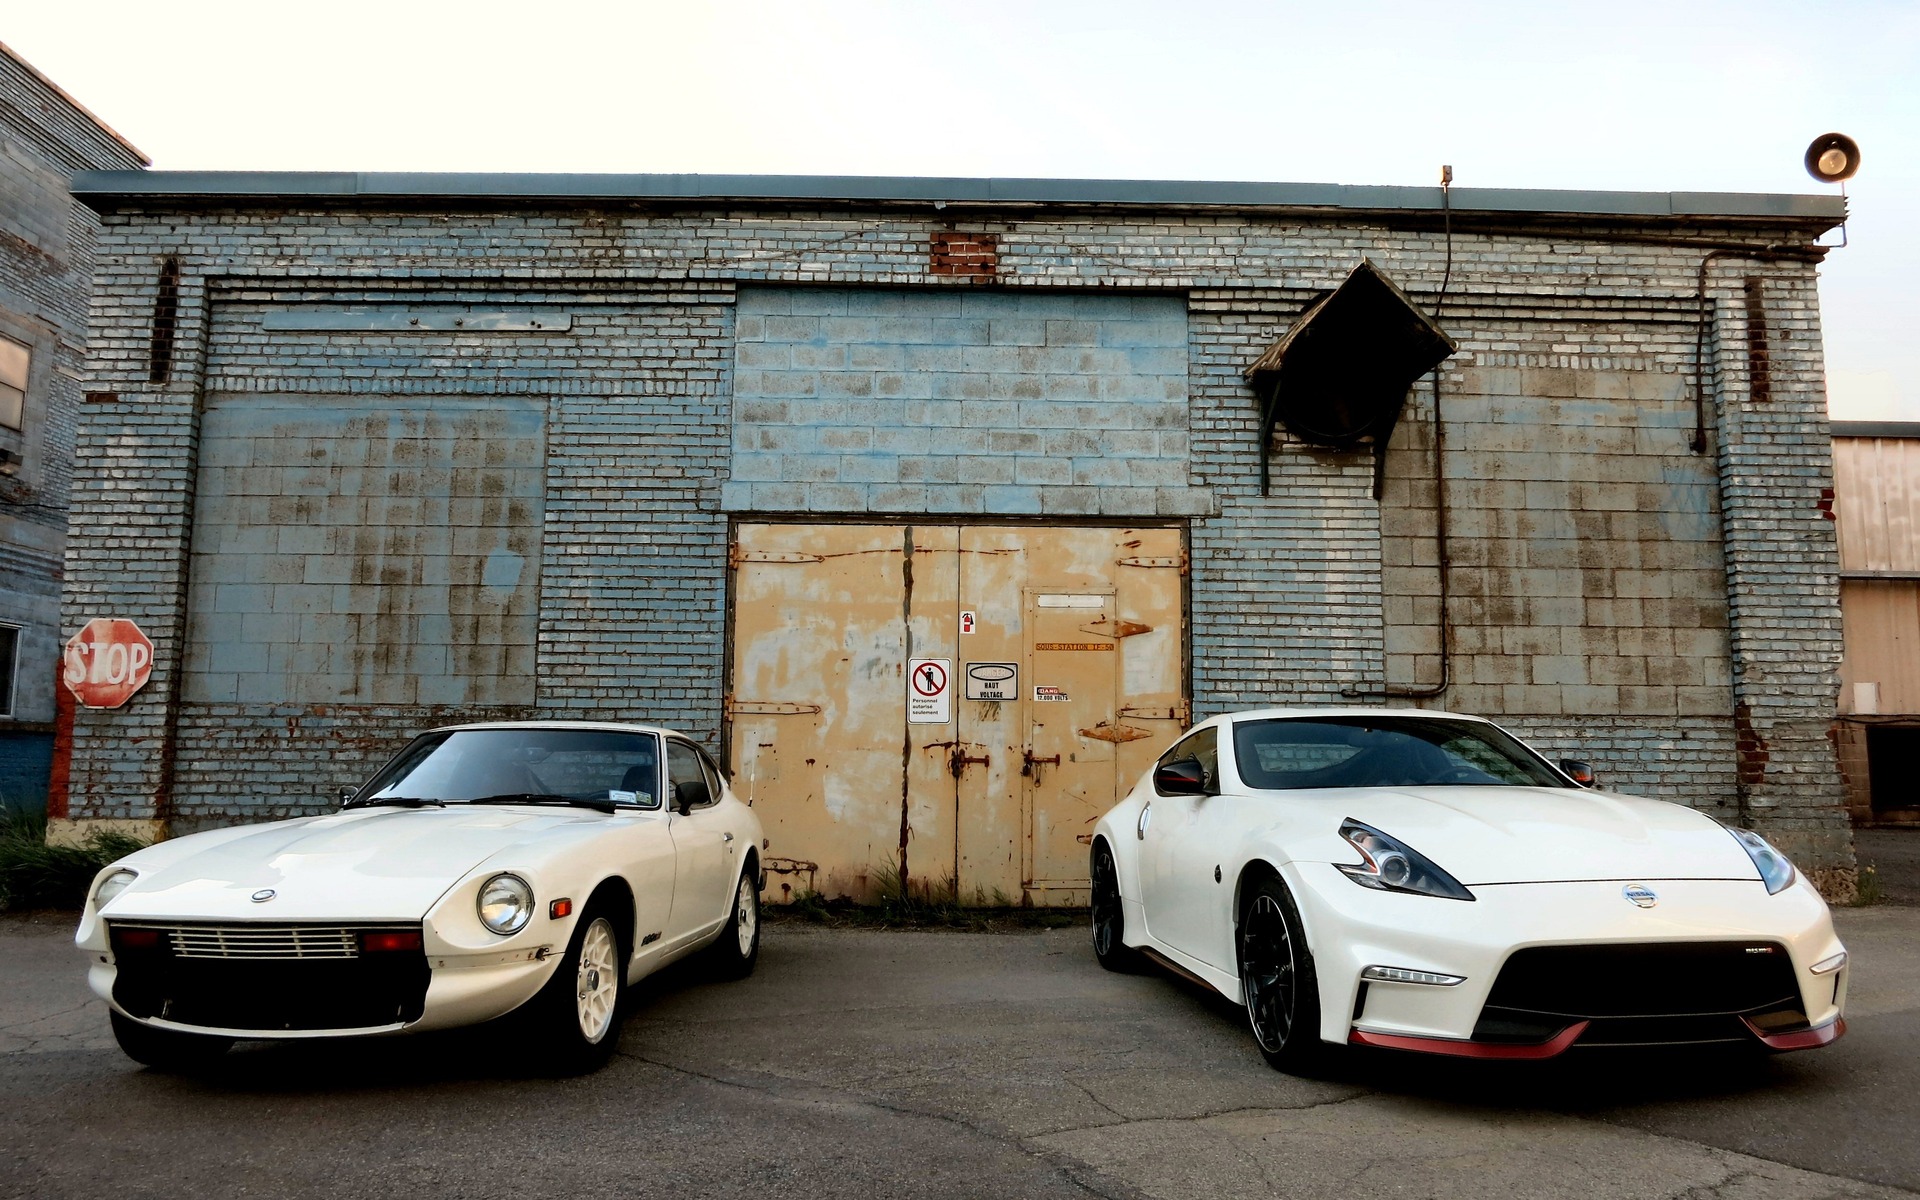 From Z to Z: Back-to-Back In The 1978 Datsun 280Z And 2015 Nissan 370Z